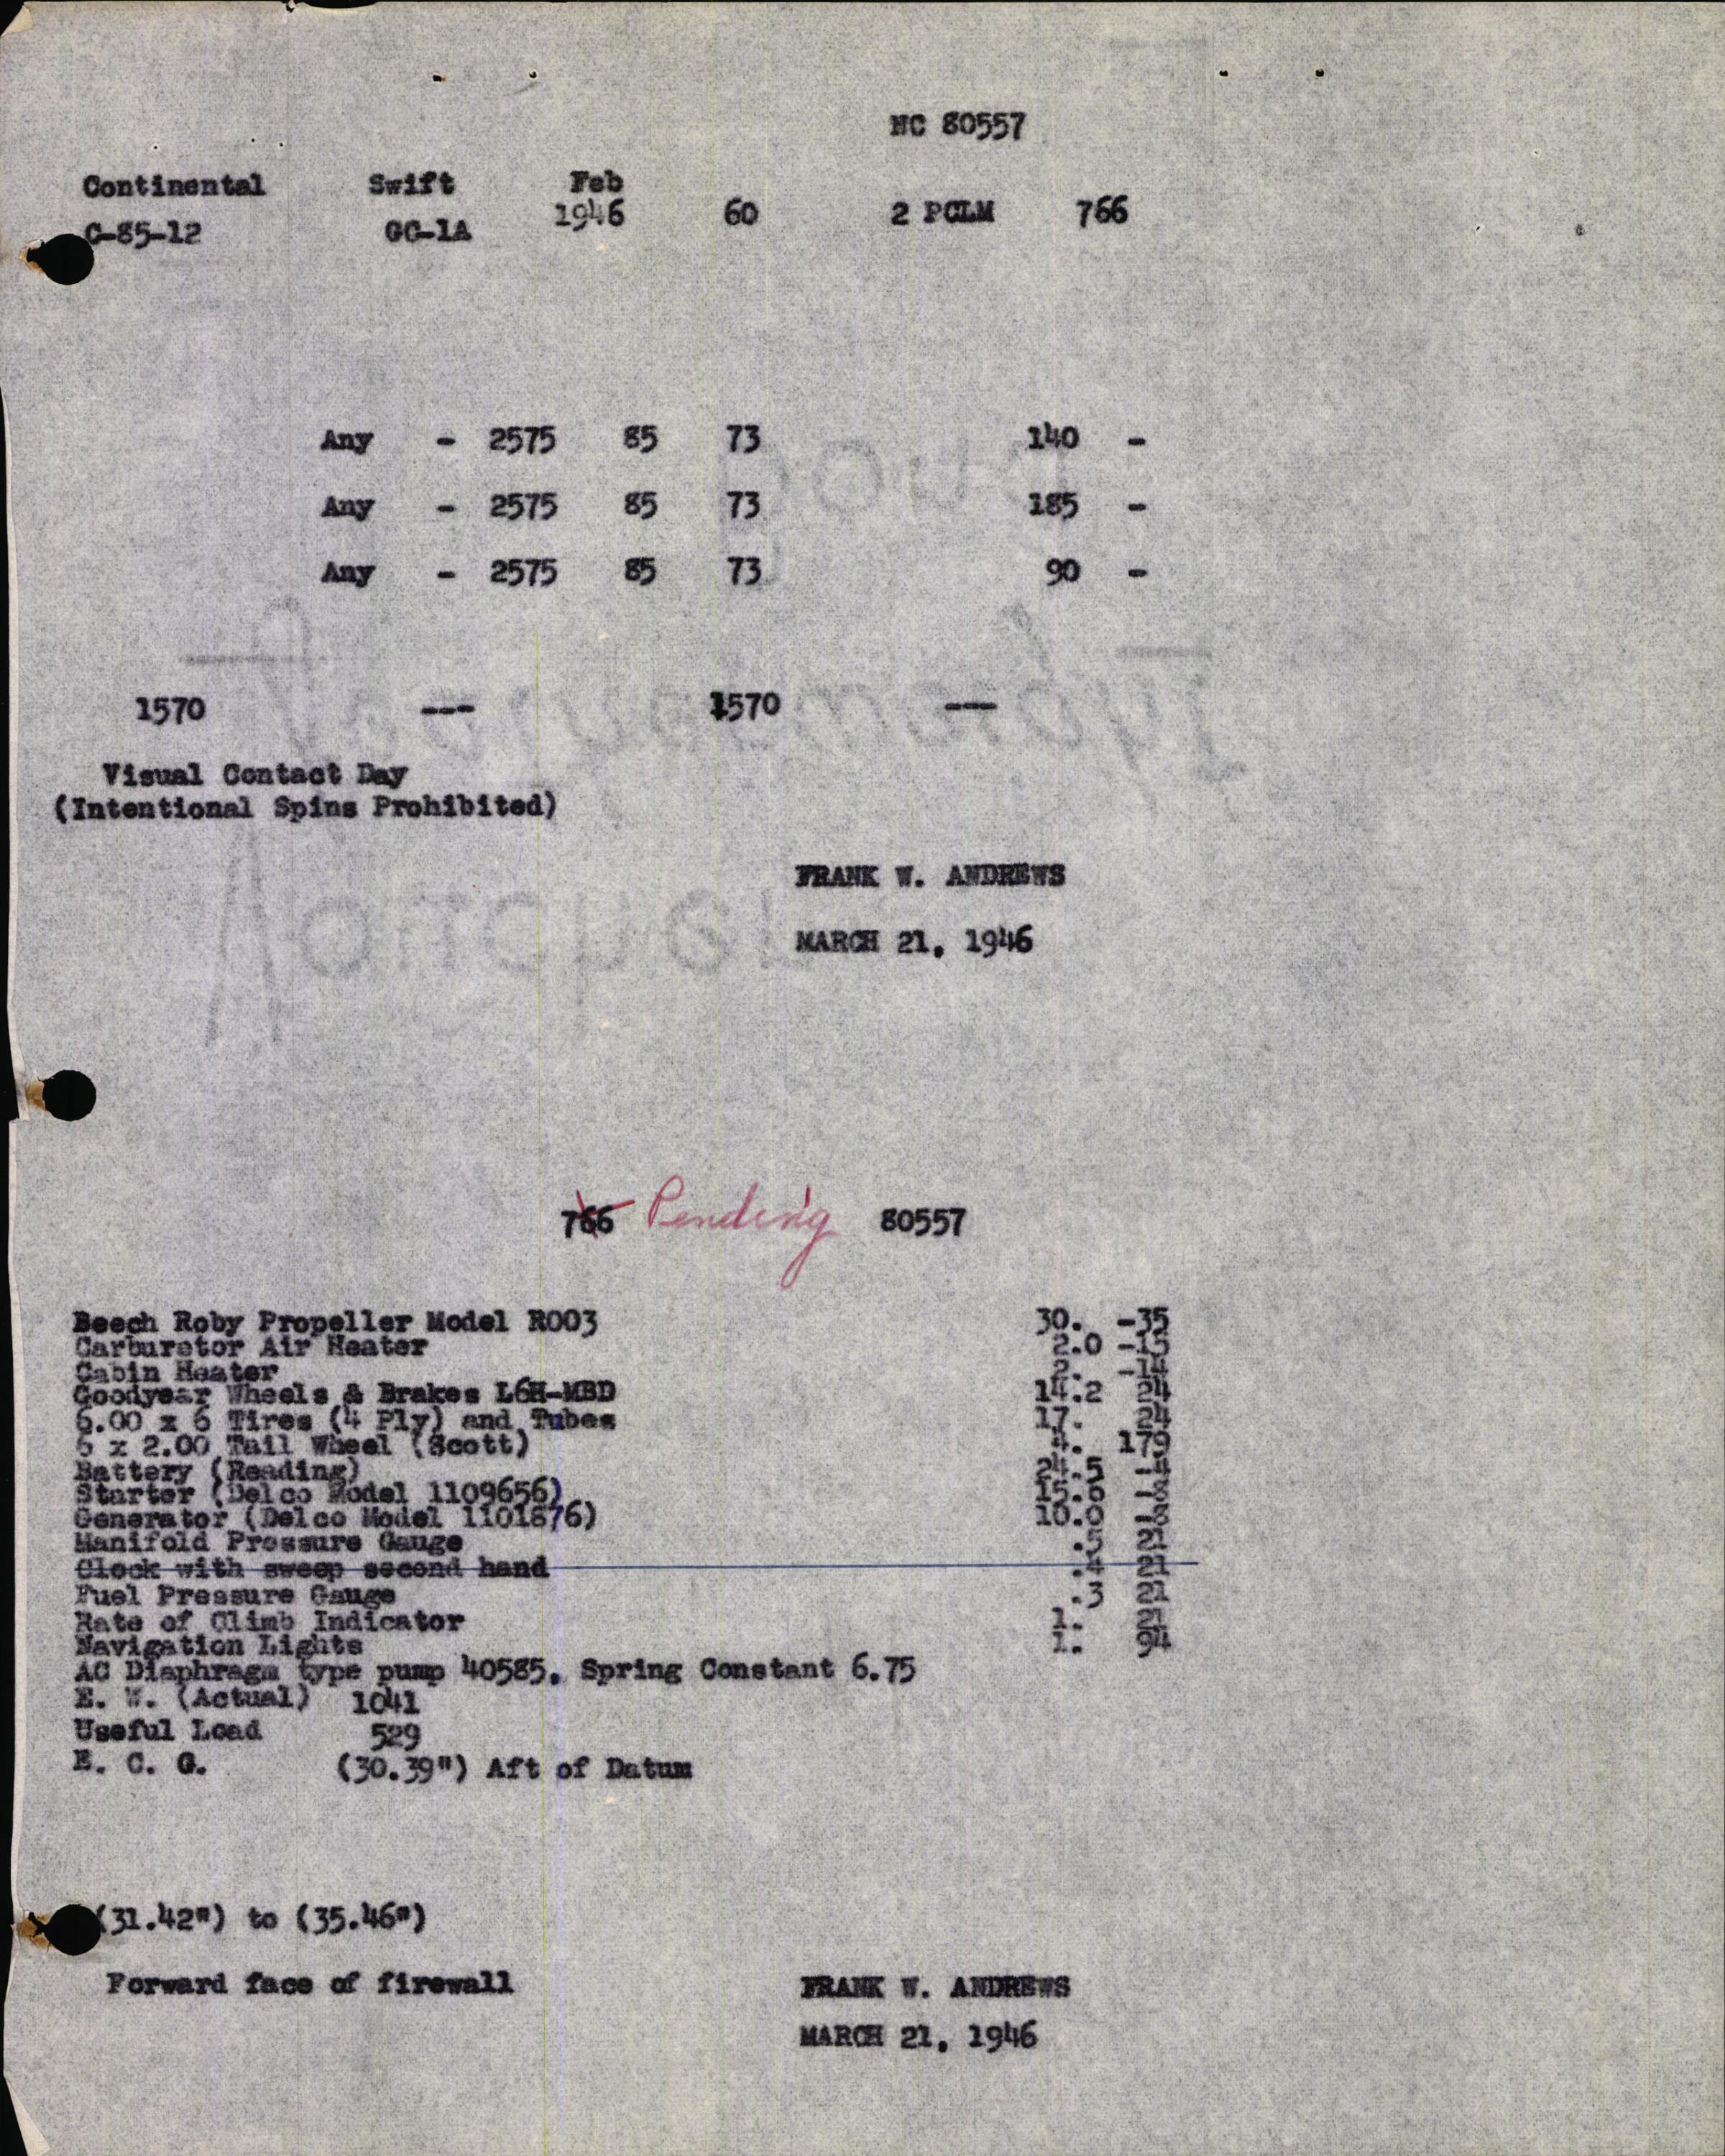 Sample page 5 from AirCorps Library document: Technical Information for Serial Number 60